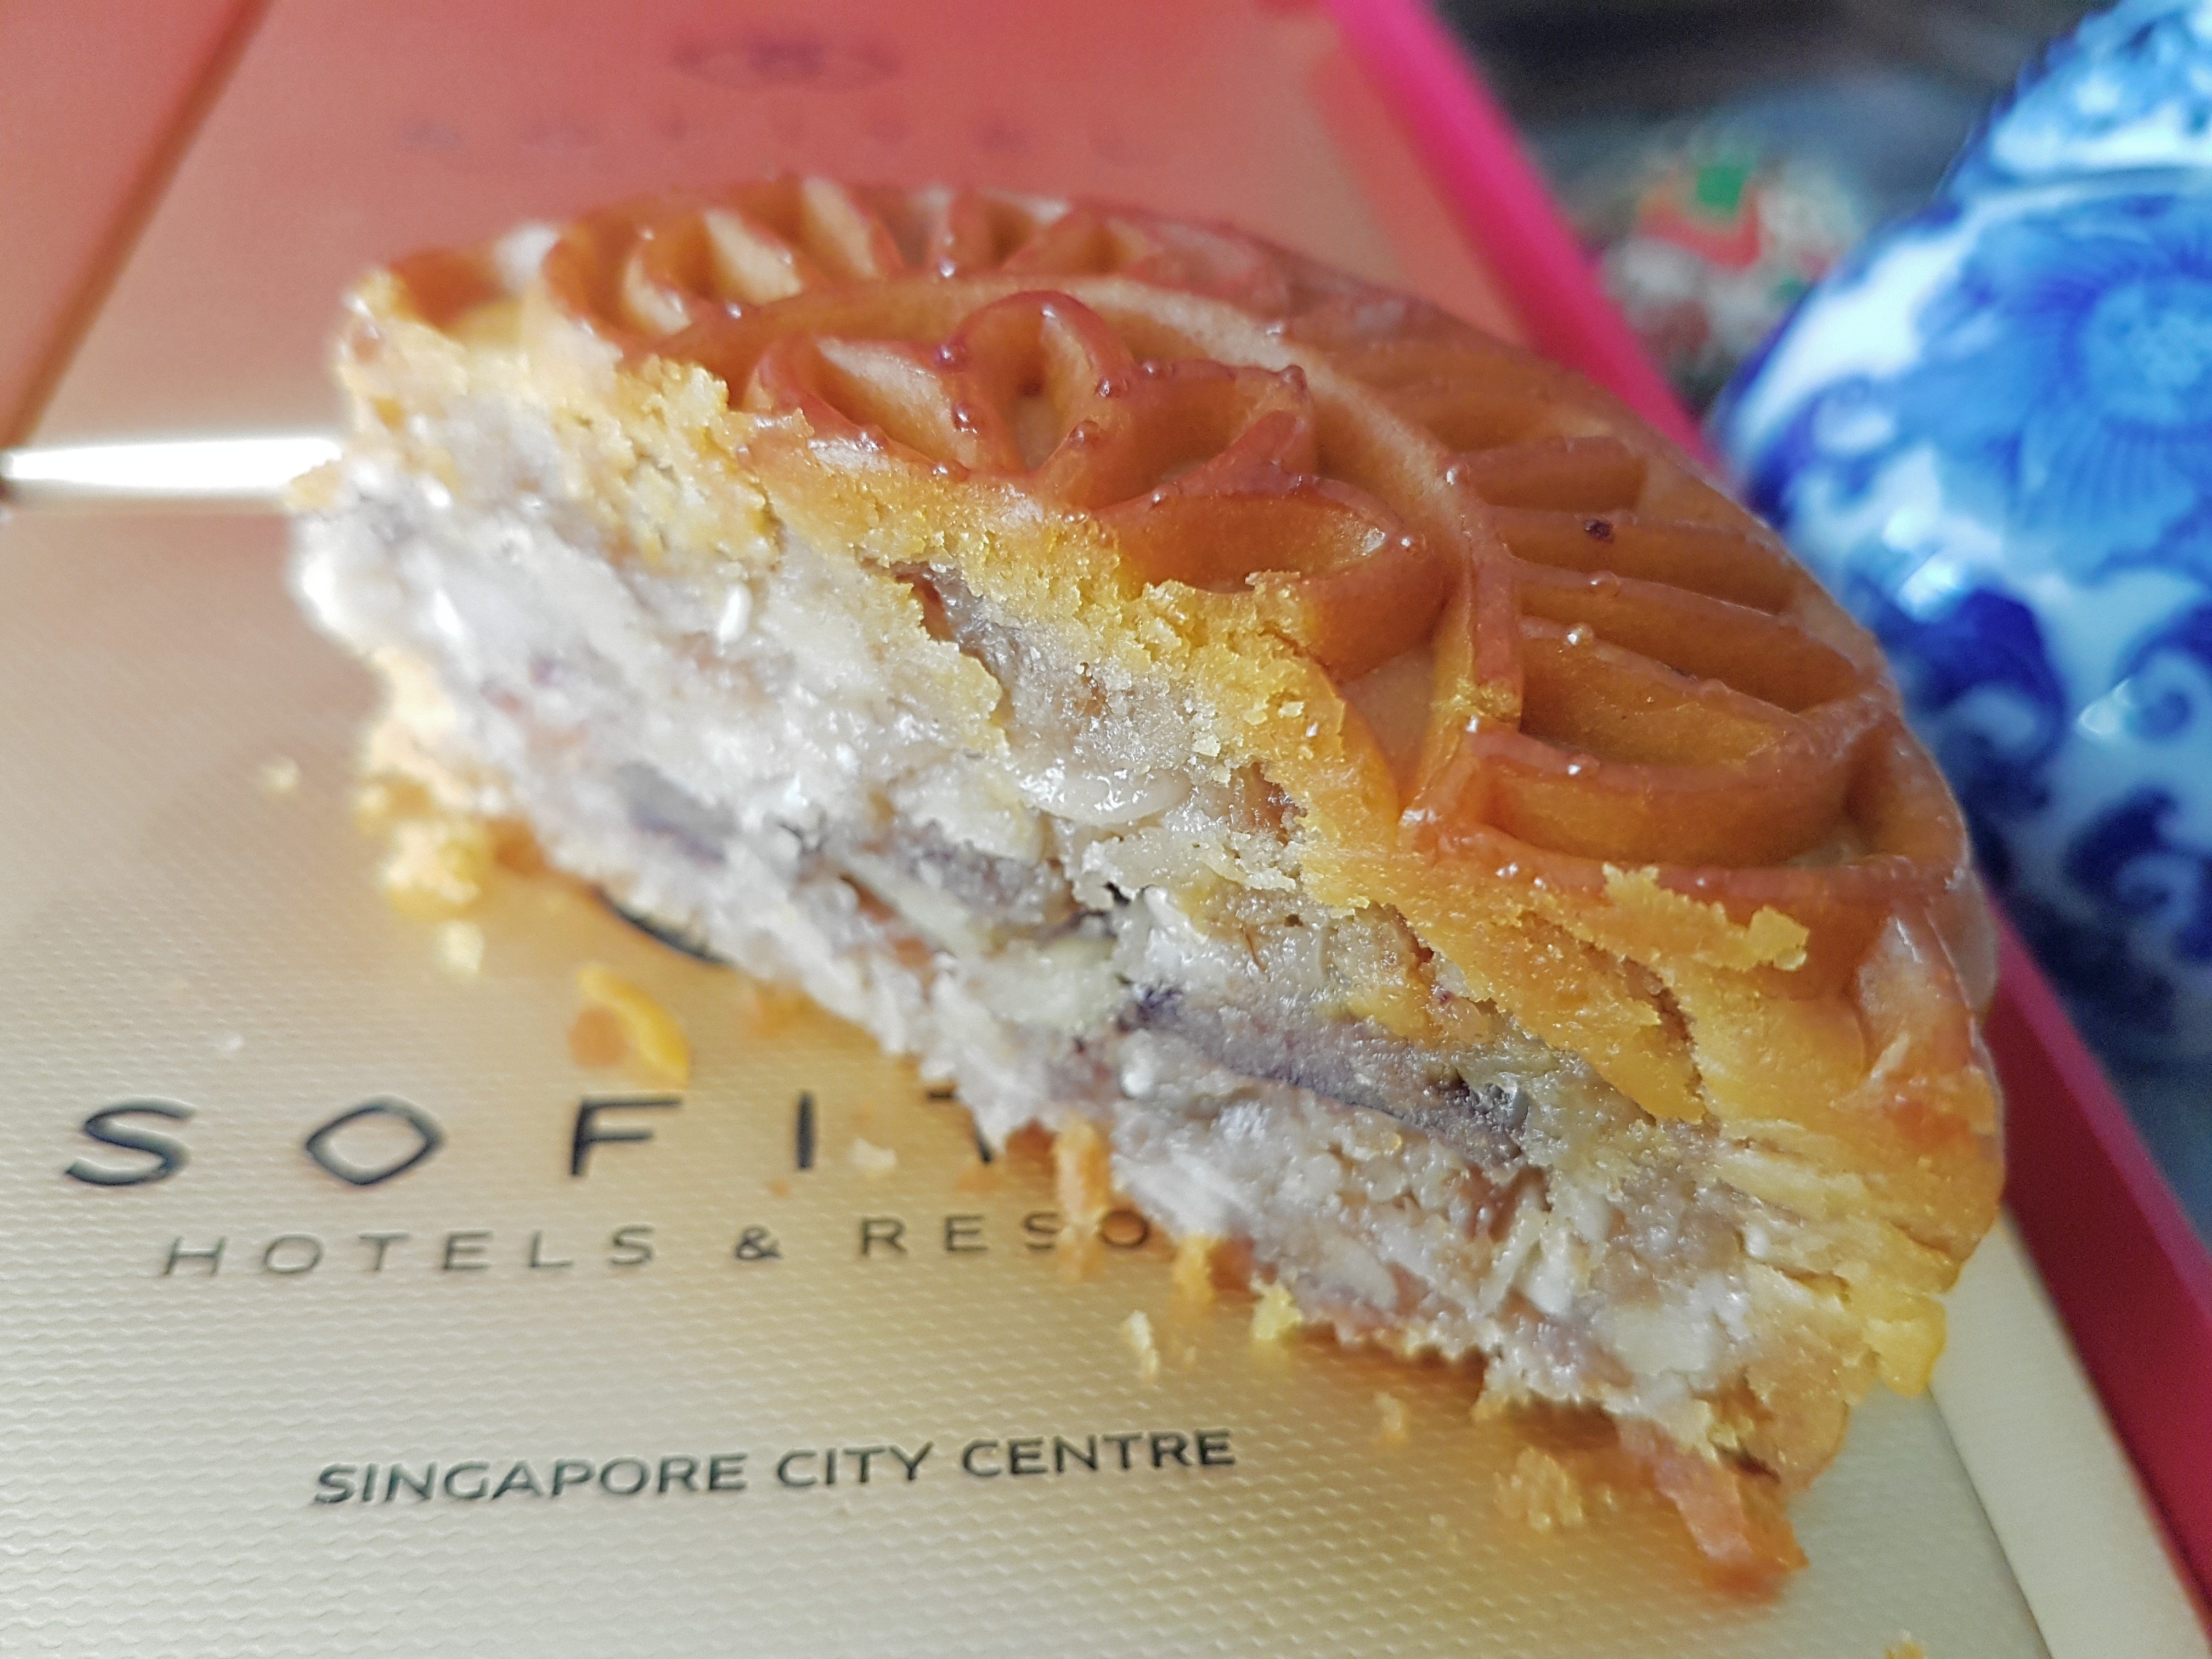 Sofitel Singapore City Centre’s foie gras, truffle oil and mixed nuts mooncake is probably the most original and surprising baked skin flavour of 2018. Photos: Cedric Tan